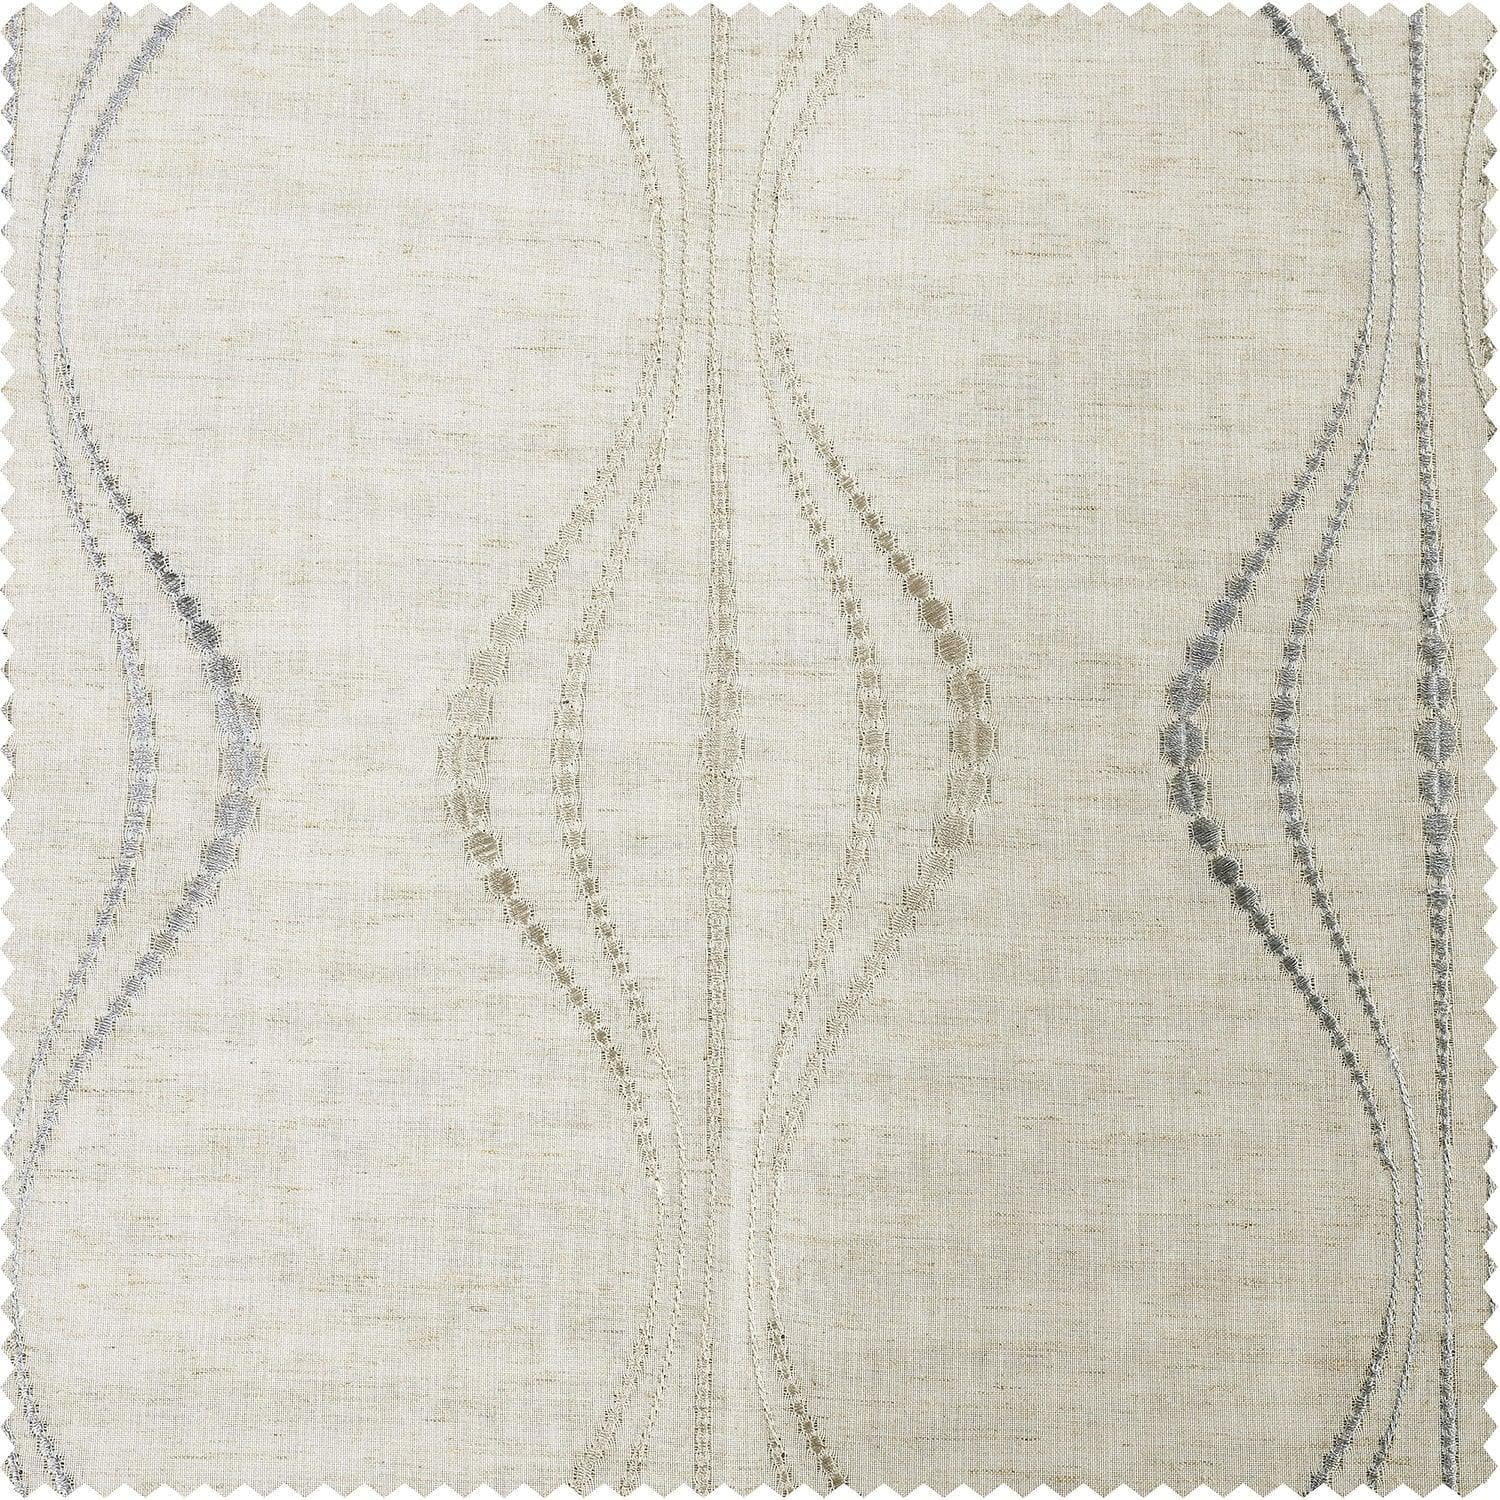 Suez Natural Striped Embroidered Patterned Faux Linen Sheer Custom Curtain